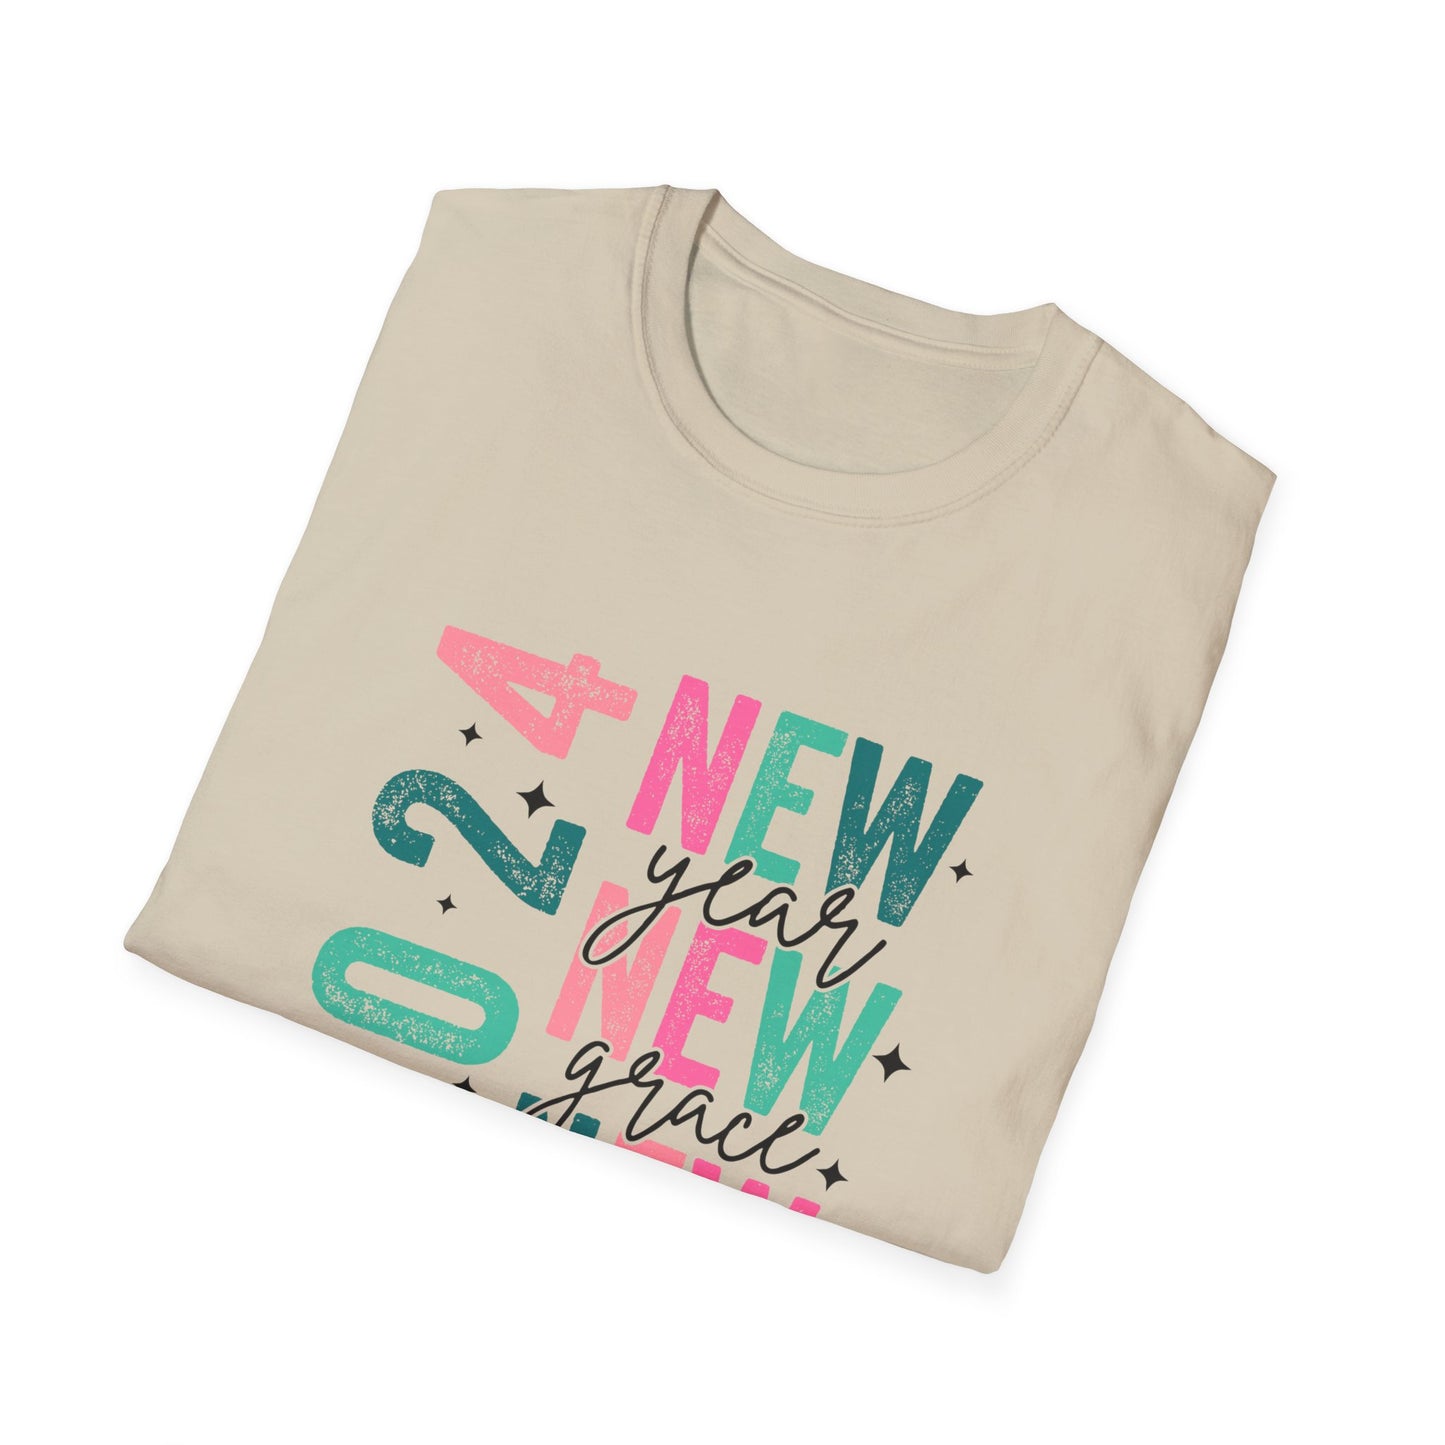 New Year New Grace Tee